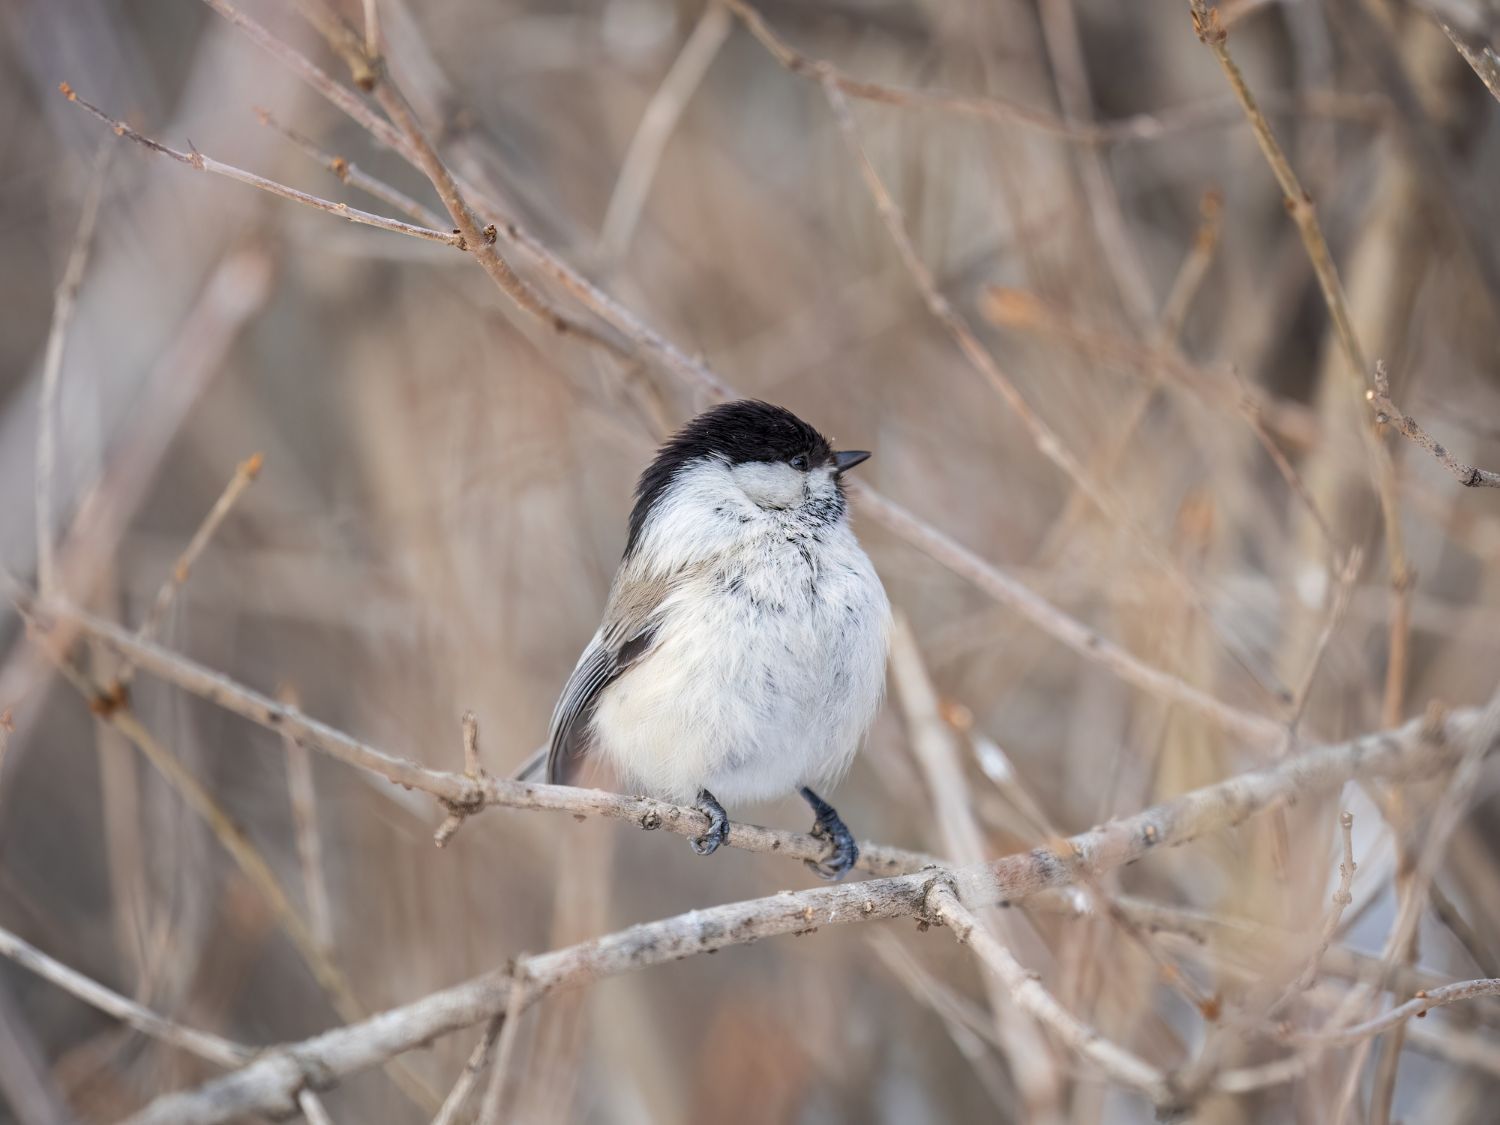 A willow tit sitting on a tree.